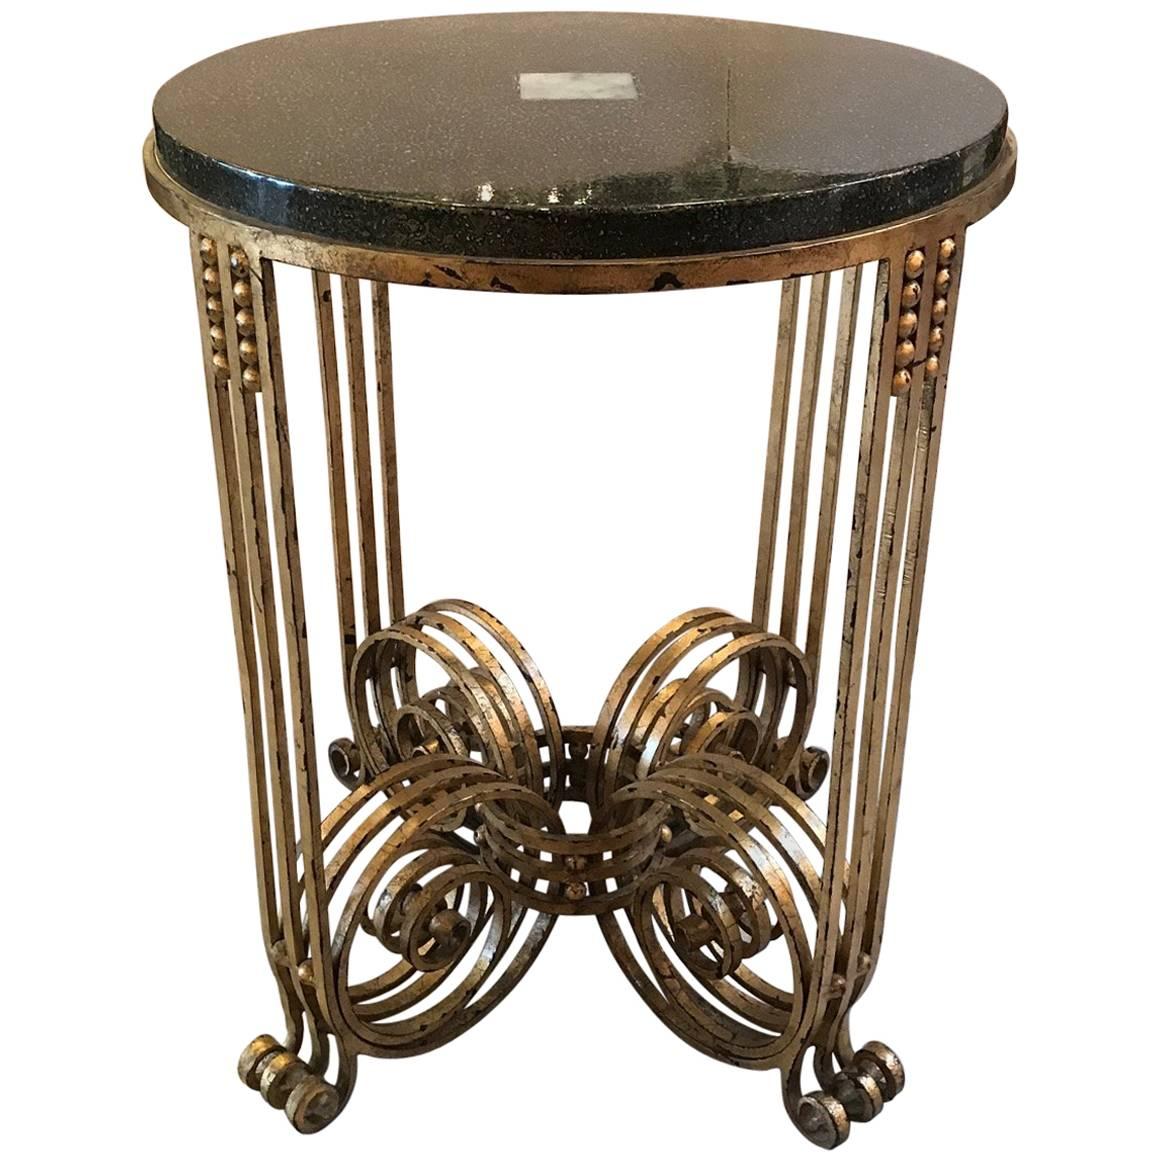 French Art Deco Wrought Iron Gueridon Table with Lacquer and Jade Top